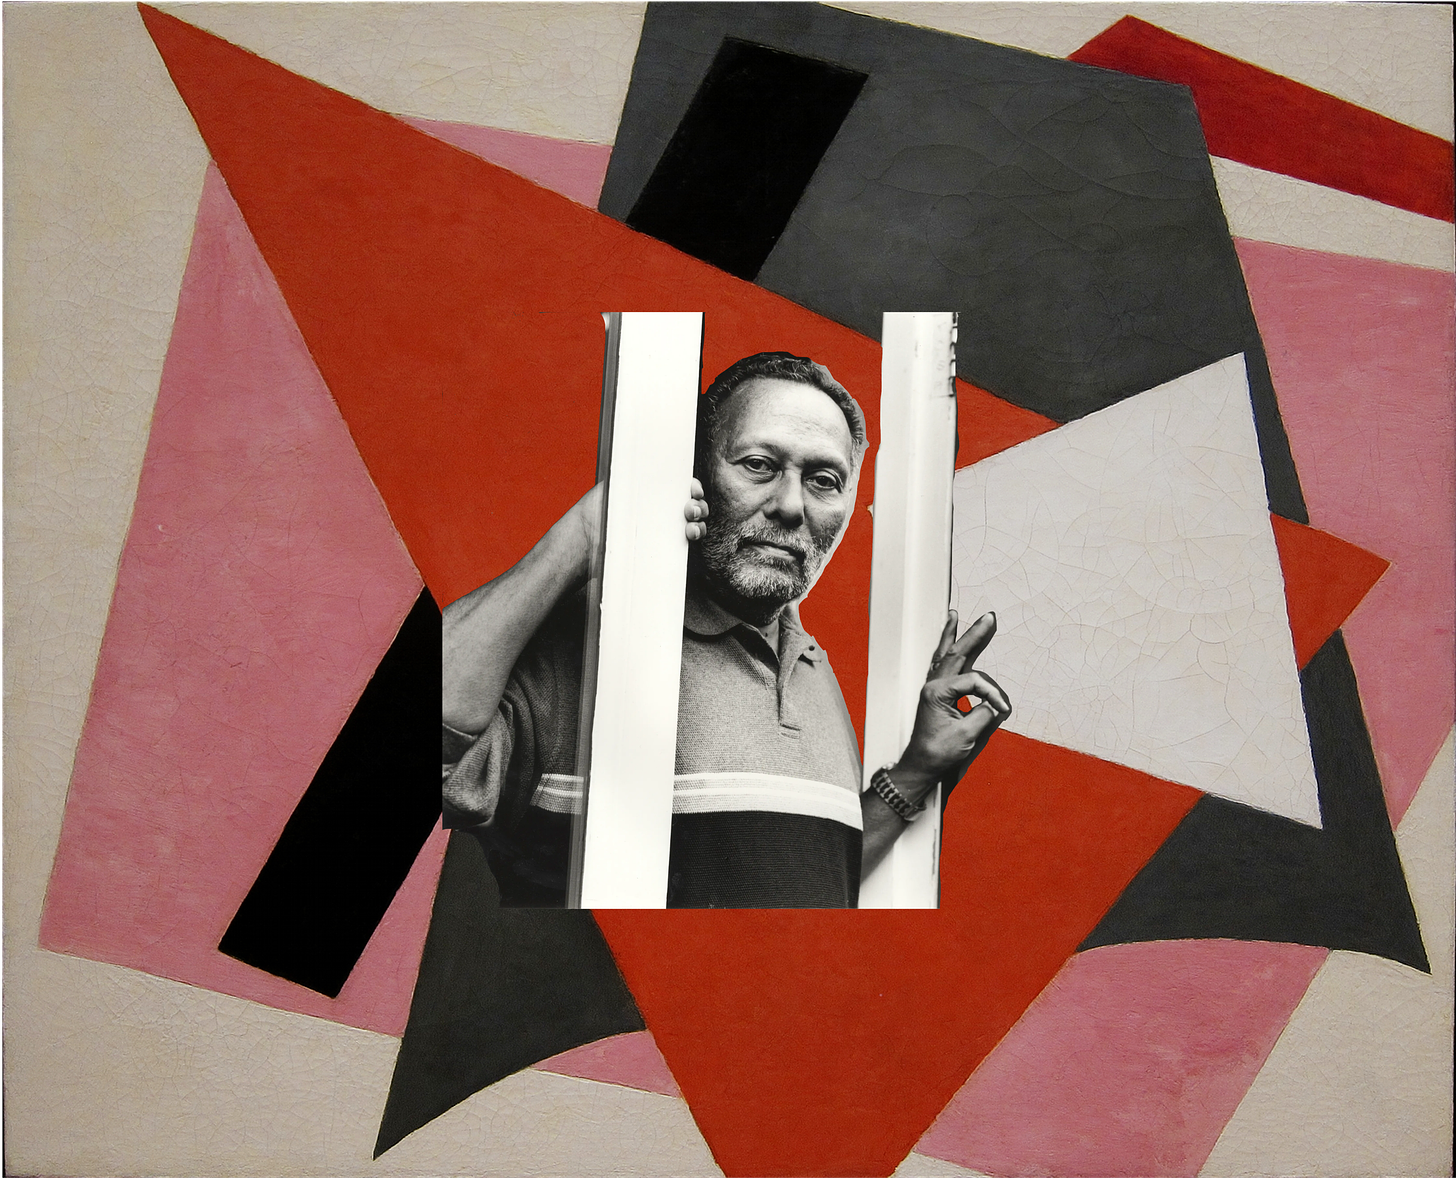 A cut out of a photographed Stuart Hall leaning between two door posts. This cut out is over a painting consisting of 6 overlapping geometric shapes from forward to back: a white cracked four sided polygon, a red triangle, a black unequal rectangle, a charcoal quadrilateral with the lower edge curved, a pink quadrilateral, and finally a thin red shape in the top right underneath the charcoal quadrilateral.